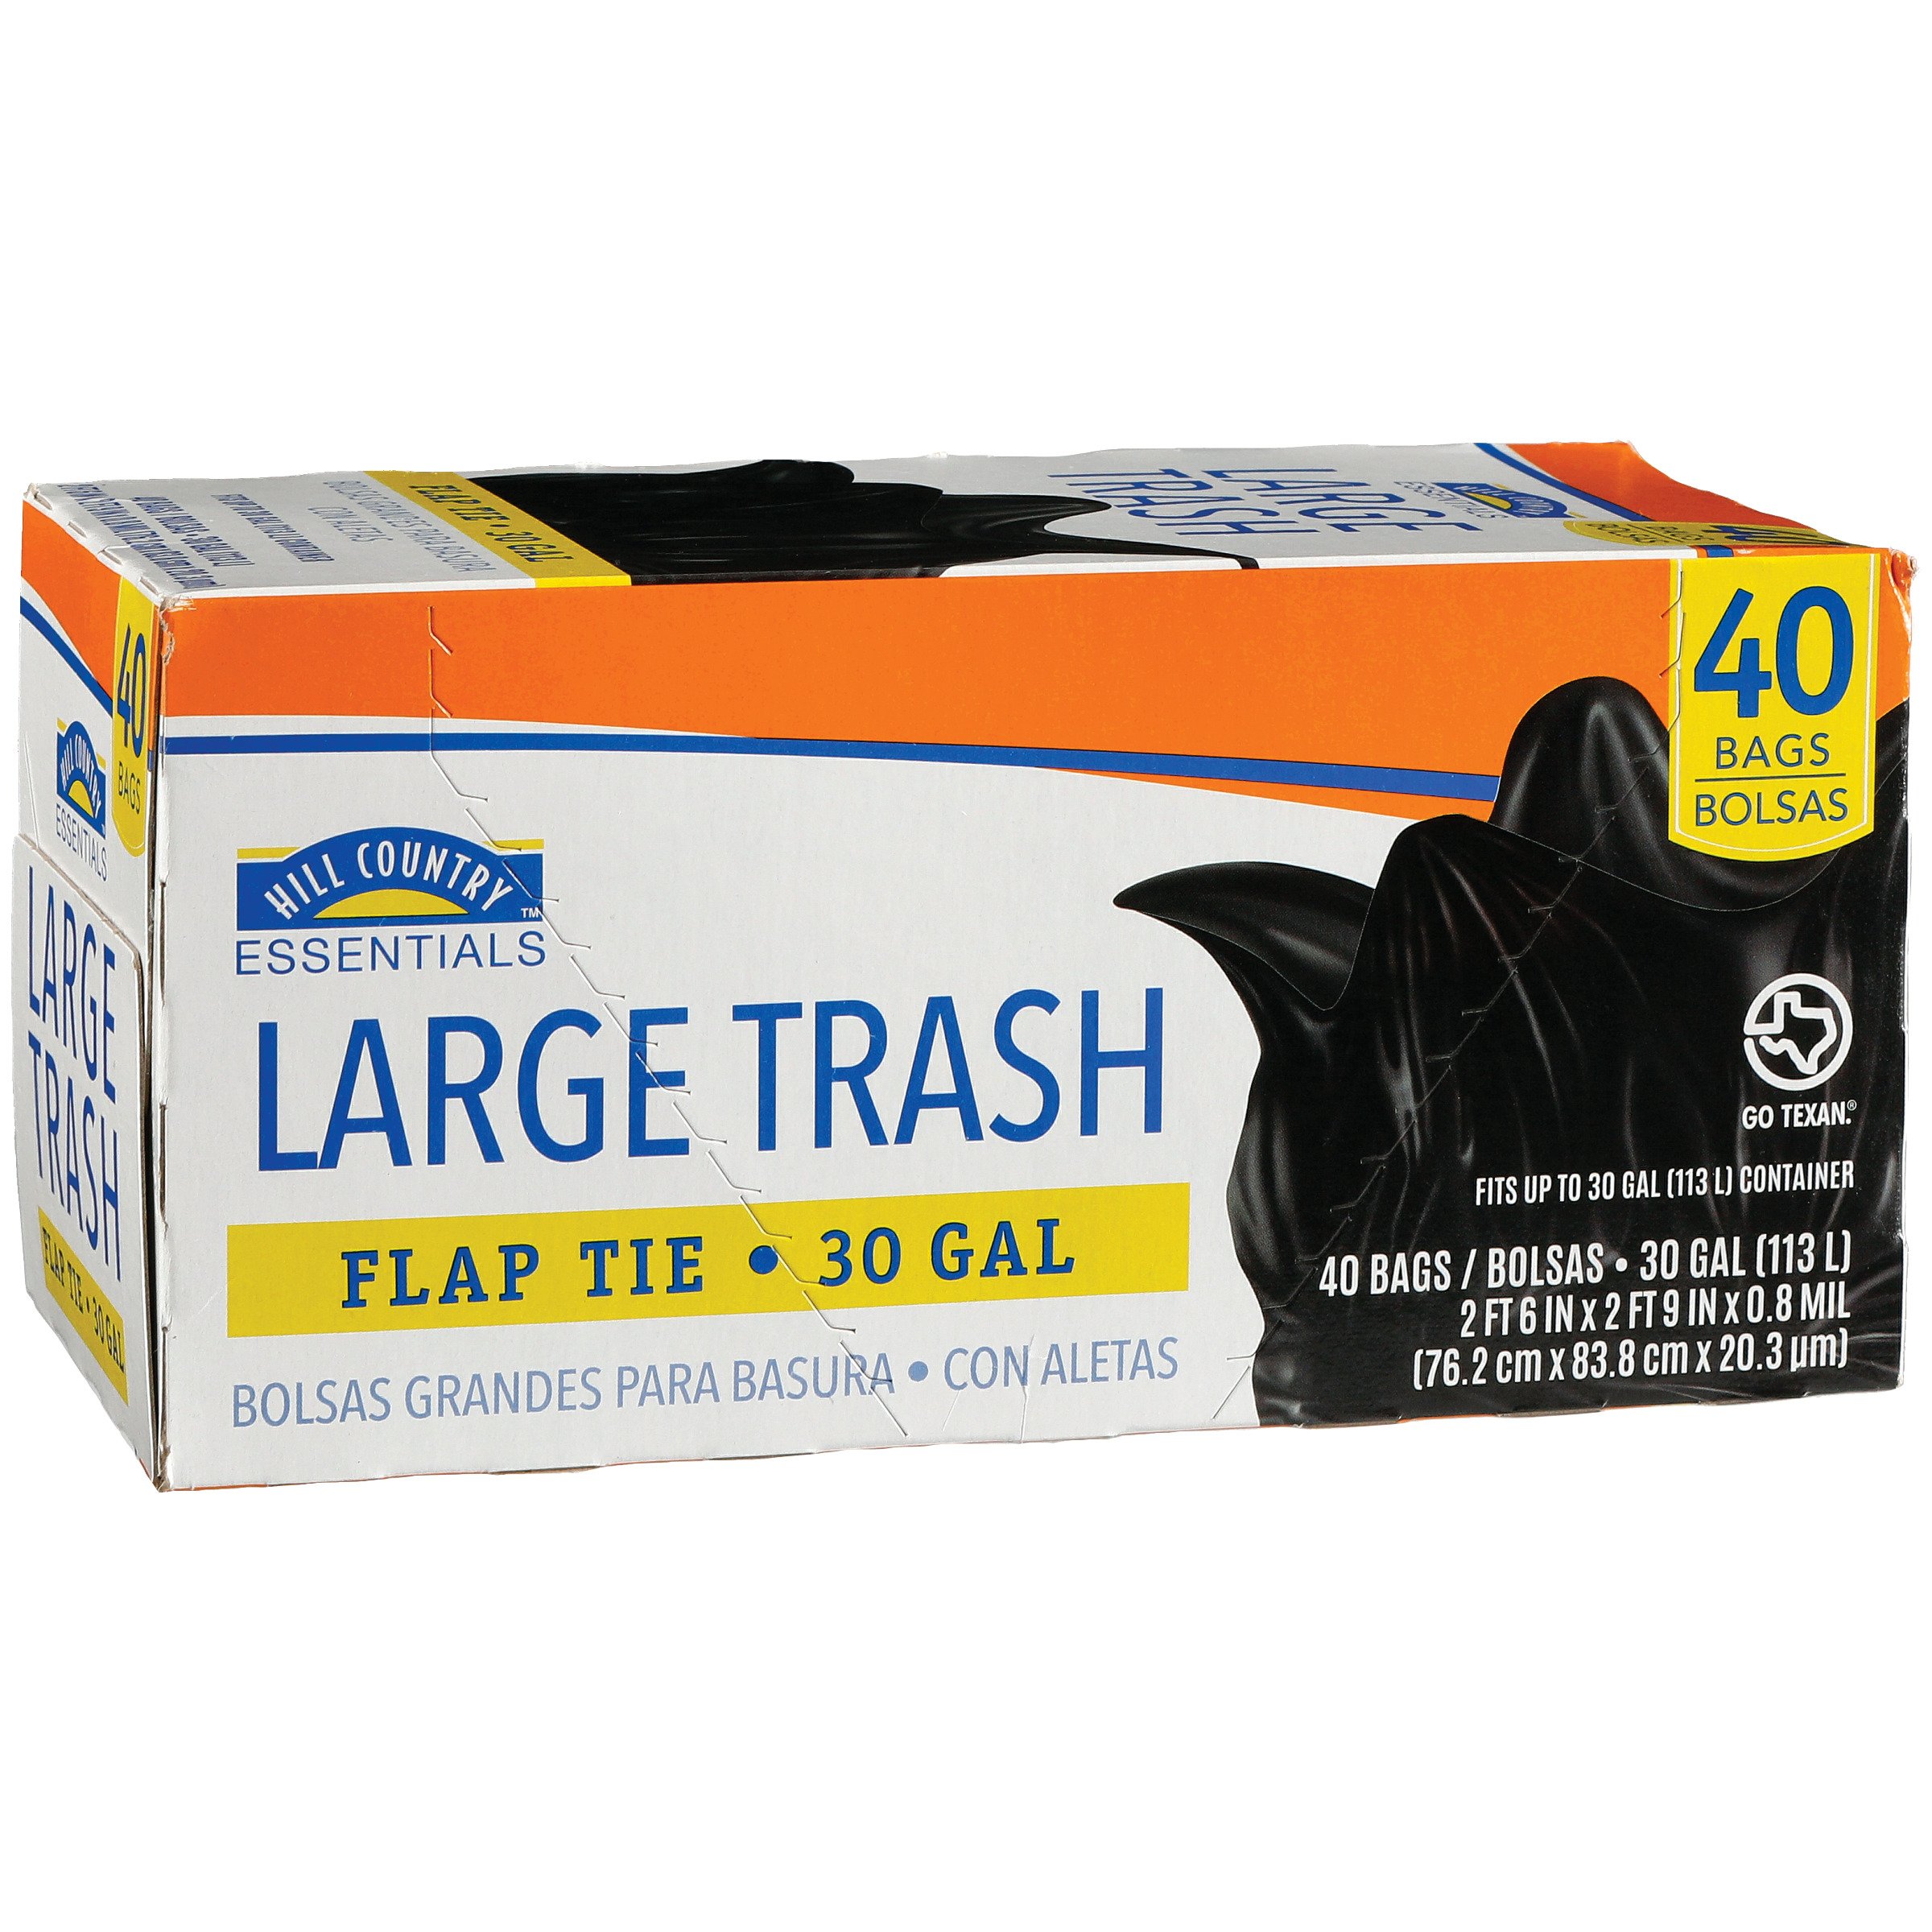 Hefty Multipurpose Easy Flaps Trash Bags, 30 Gallon, 40 Count (Pack of 6)